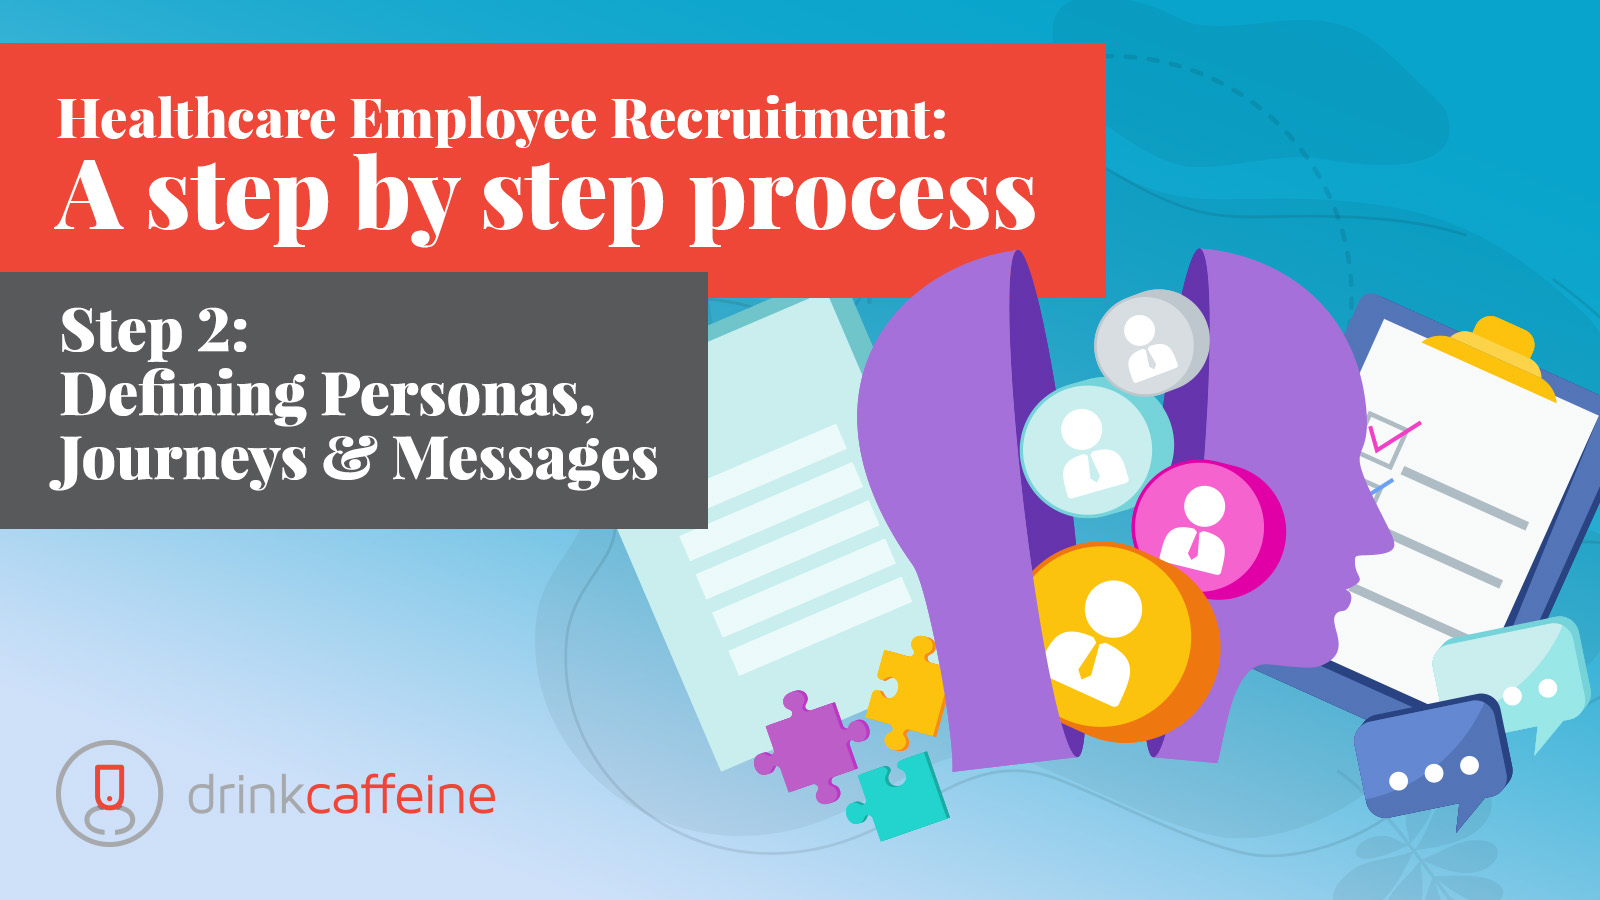 Healthcare Employee Recruitment Step 2: Defining Personas, Journeys & Messages￼ blog image